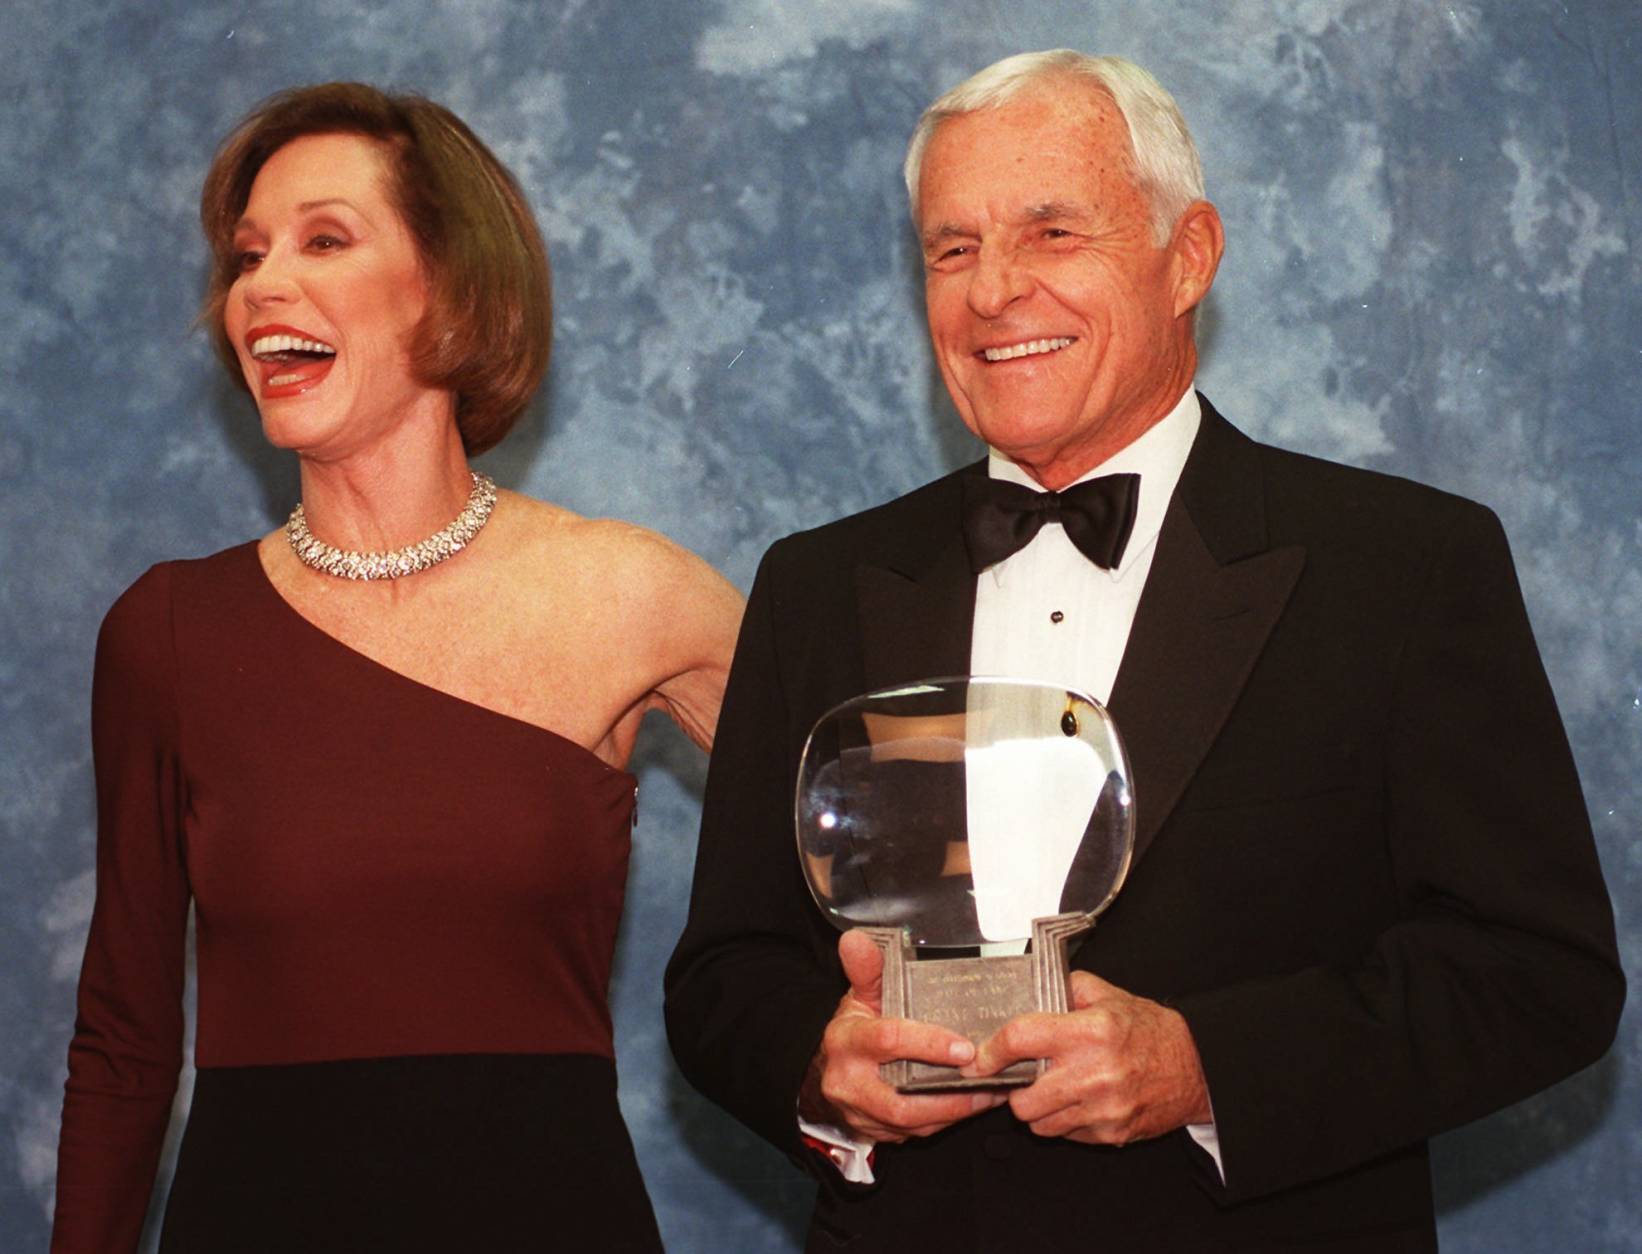 FILE - In this Saturday, Nov. 1, 1997, file photo, Television executive Grant Tinker holds up his Hall of Fame award alongside his ex-wife Mary Tyler Moore at the Academy of Television Arts &amp; Sciences' 13th Annual Hall of Fame induction ceremonies in the North Hollywood section of Los Angeles. Tinker, who brought "The Mary Tyler Moore Show" and other hits to the screen as a producer and a network boss, has died. Tinker died Monday, Nov. 28, 2016, at his home in Los Angeles, according to his son, Mark Tinker. (AP Photo/Chris Pizzello, File)